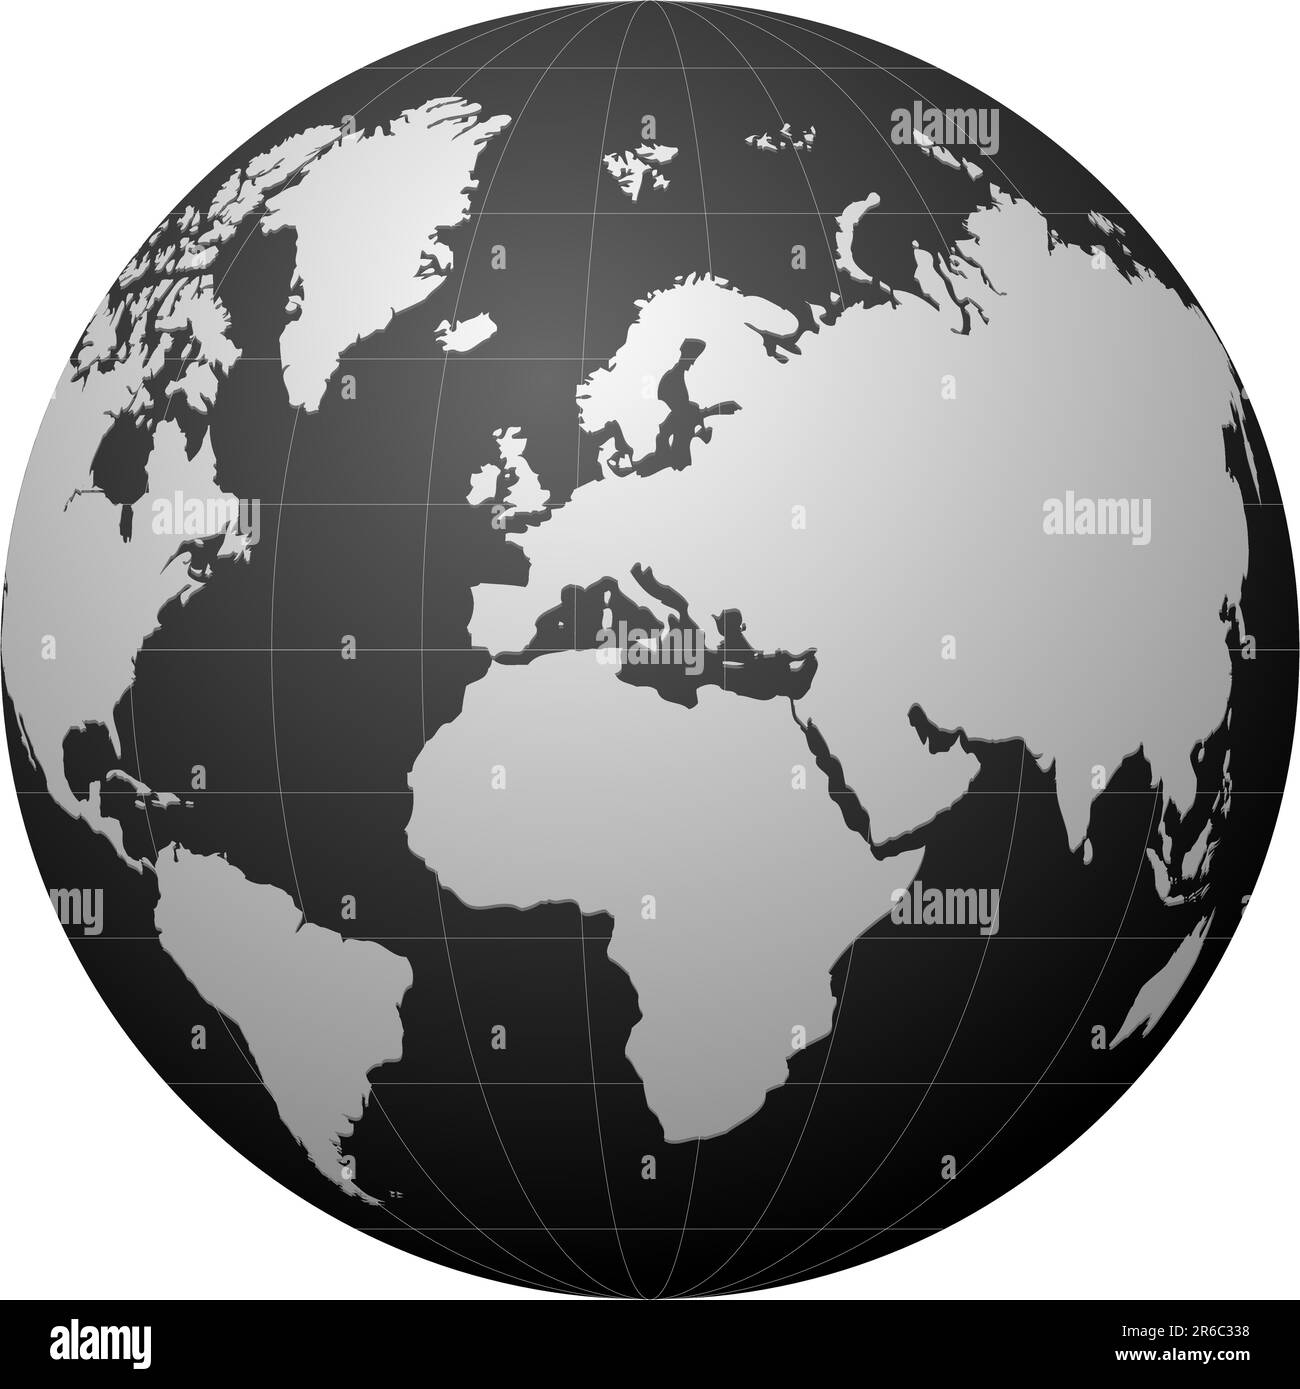 vector globe isolated on white background Stock Vector